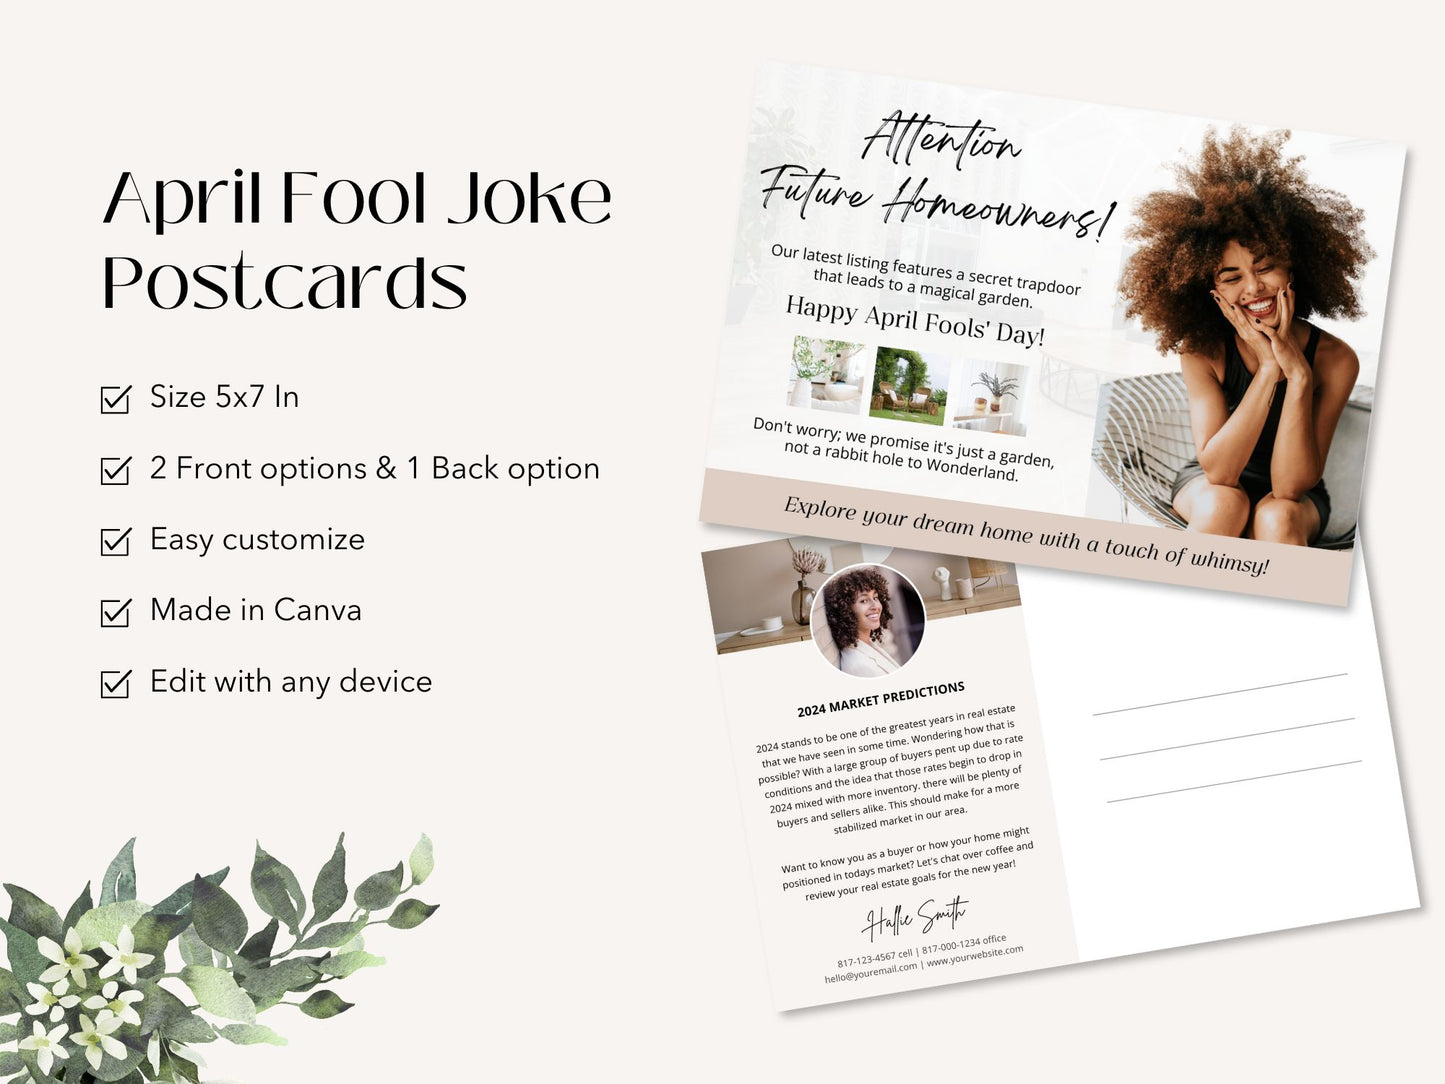 April Fool Joke Postcards - Professionally designed real estate postcards for lighthearted and playful communication during the April Fool's season.